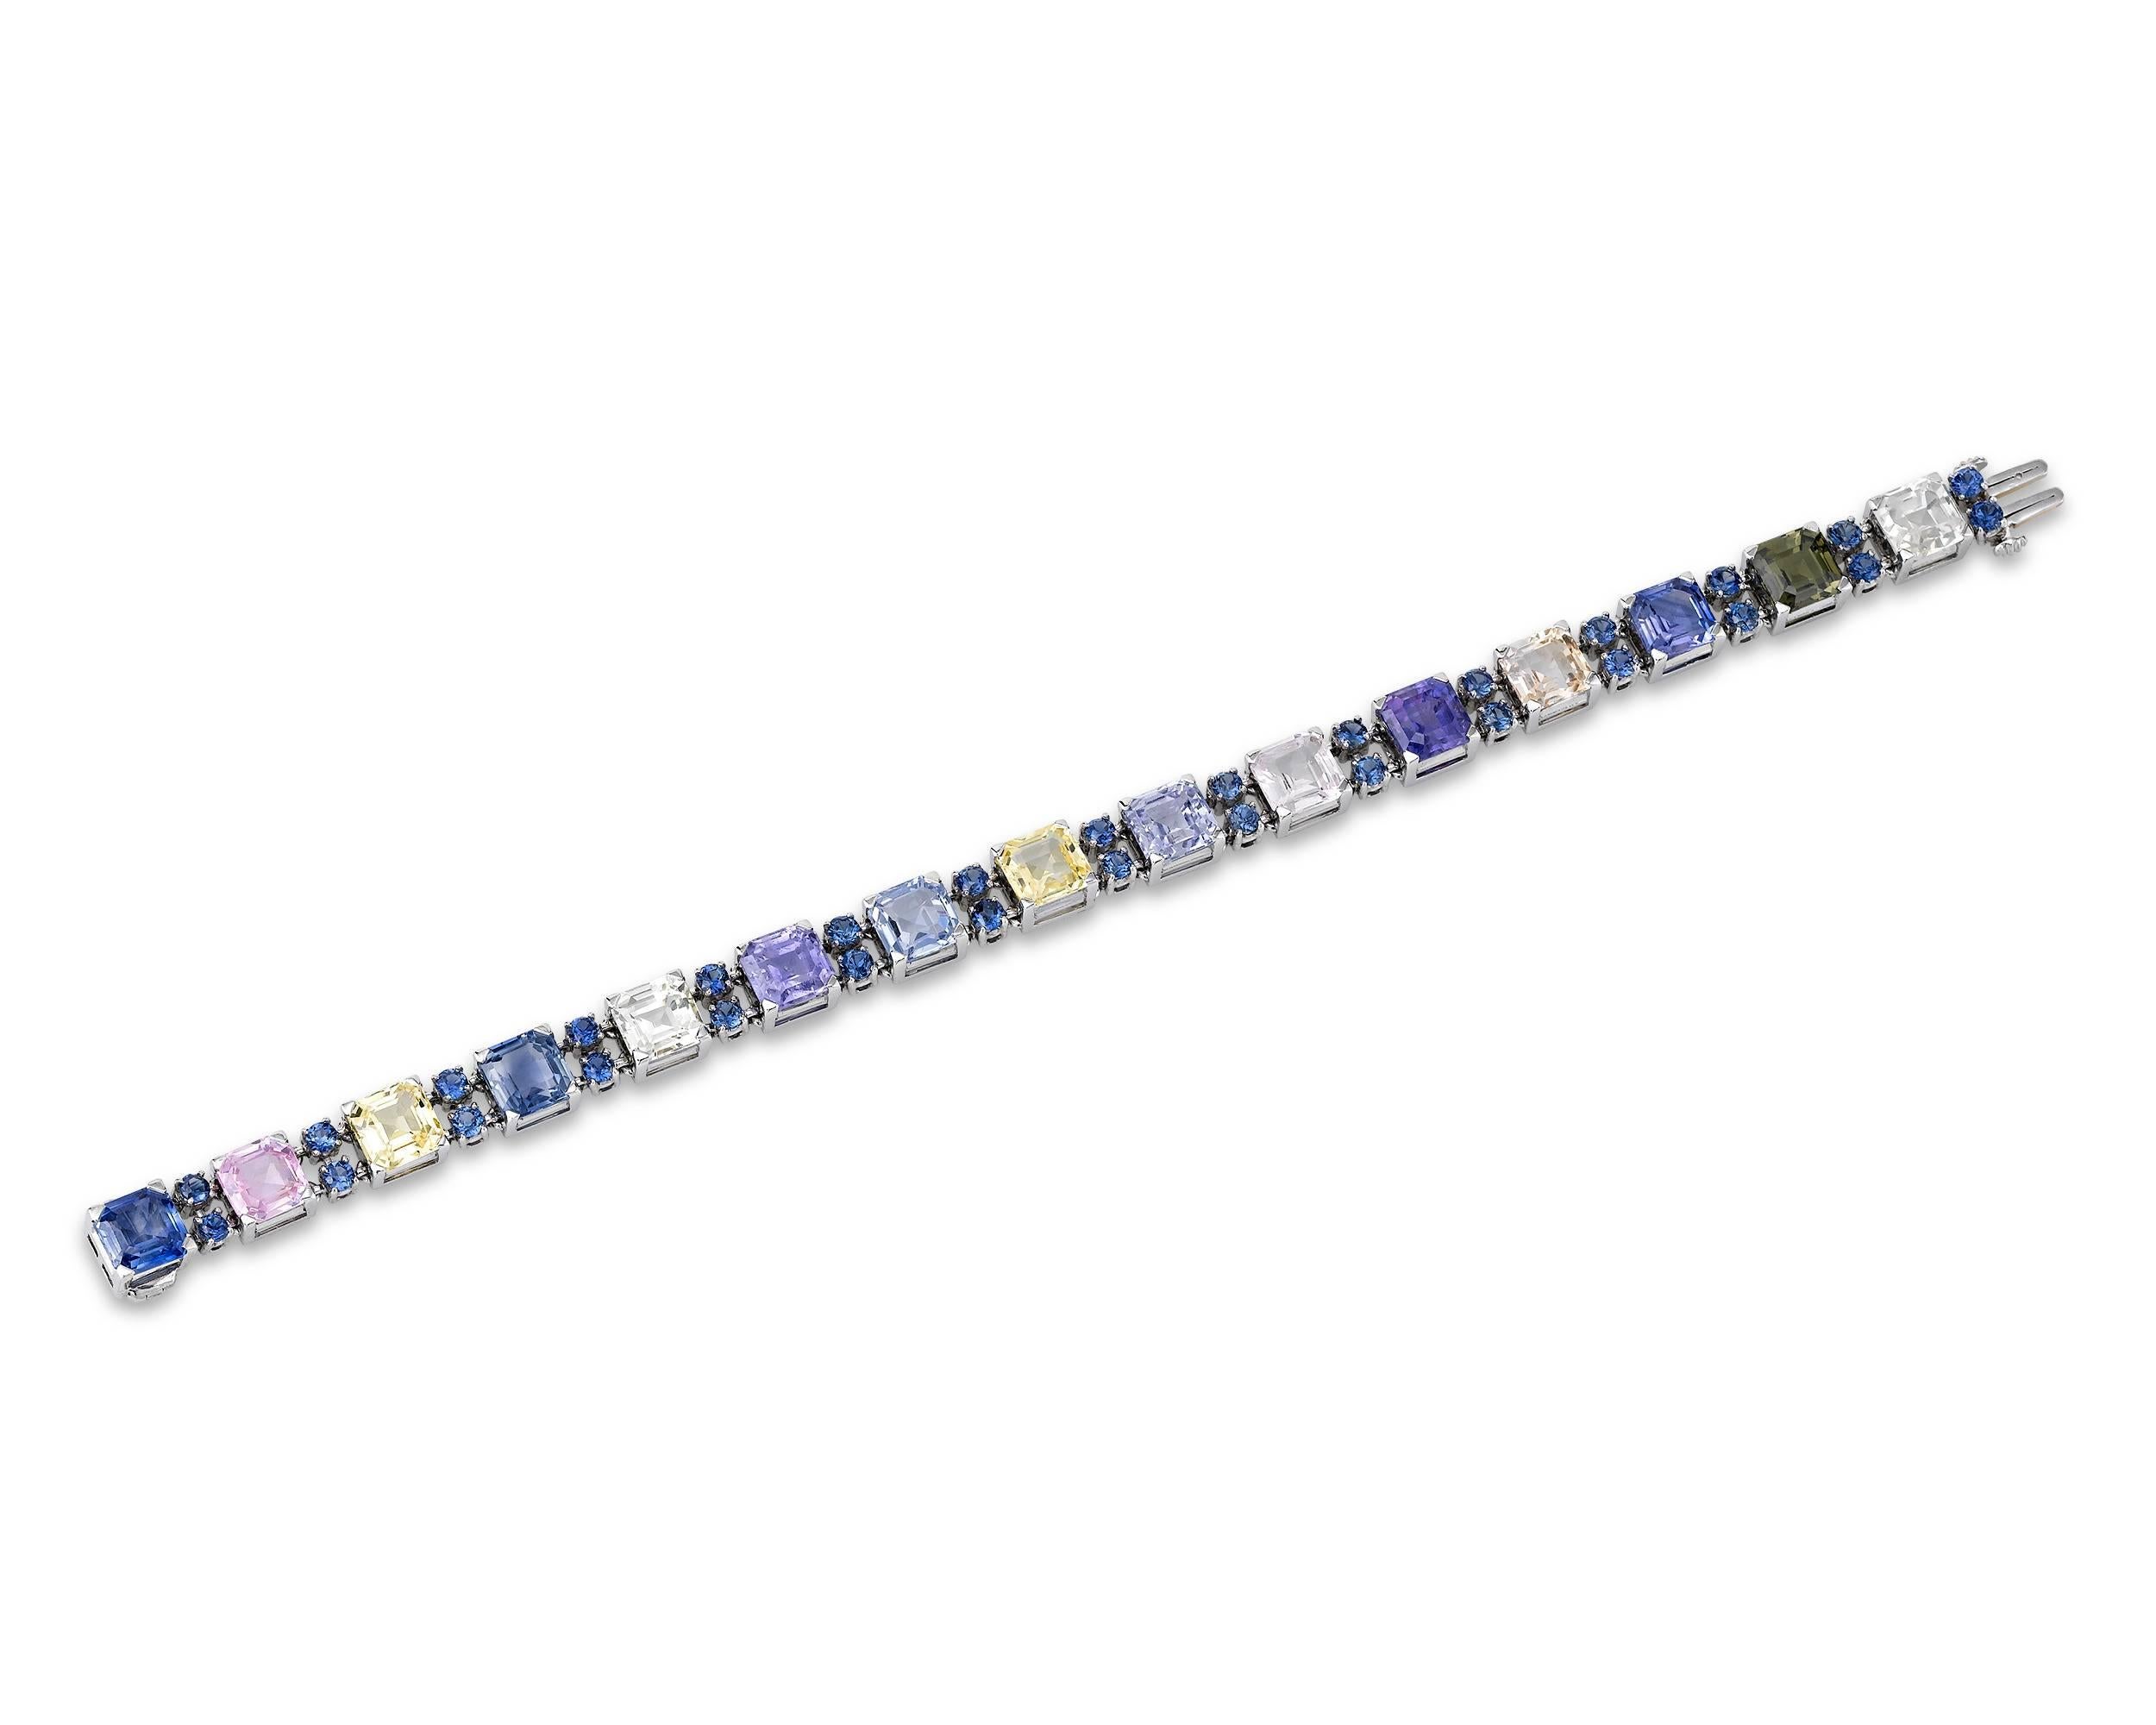 Fifteen stunning square sapphires, ranging in color from traditional blue to pink to green and all hues in between, present a sparkling rainbow of hues in this amazing bracelet by the celebrated Oscar Heyman. These magnificent gems are certified by